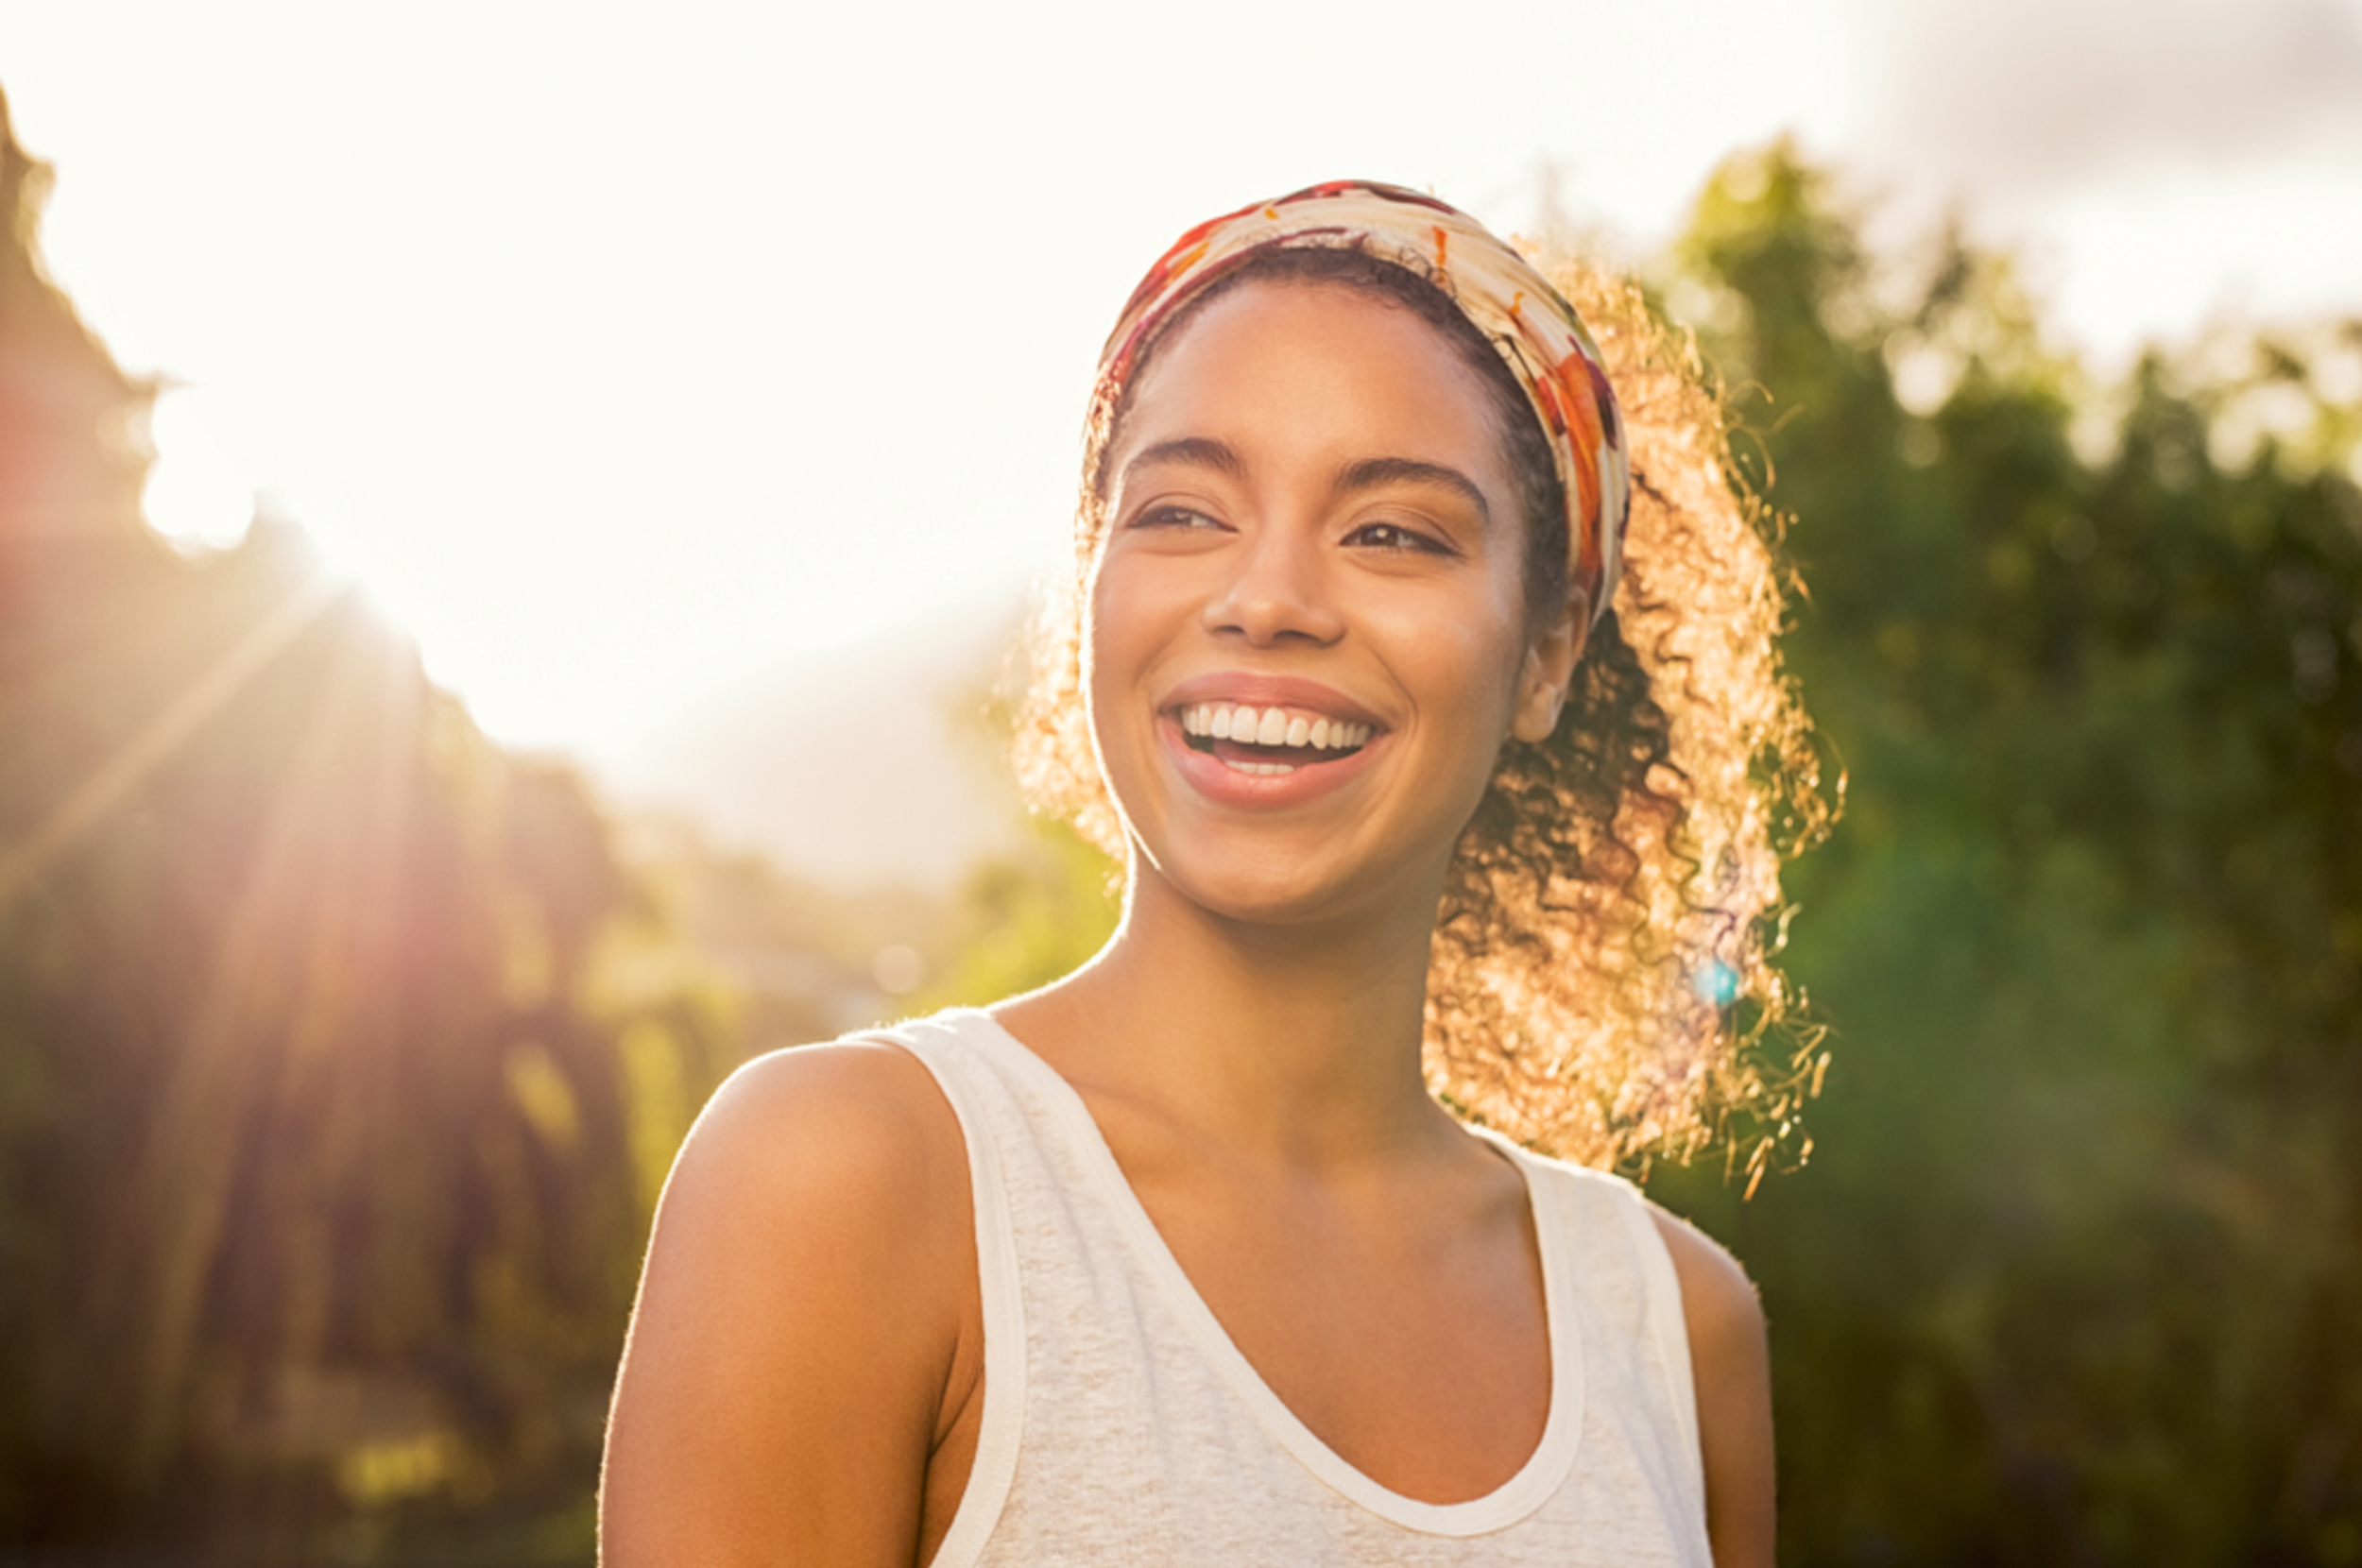 <p>Getting outside can be really helpful for your mental health. Go for a walk around the block, or simply spend a little time soaking up the sun — and a little Vitamin D — for a midday boost when you're feeling a little blah. </p><p><a href='https://www.msn.com/en-us/community/channel/vid-cj9pqbr0vn9in2b6ddcd8sfgpfq6x6utp44fssrv6mc2gtybw0us'>Follow us on MSN to see more of our exclusive lifestyle content.</a></p>